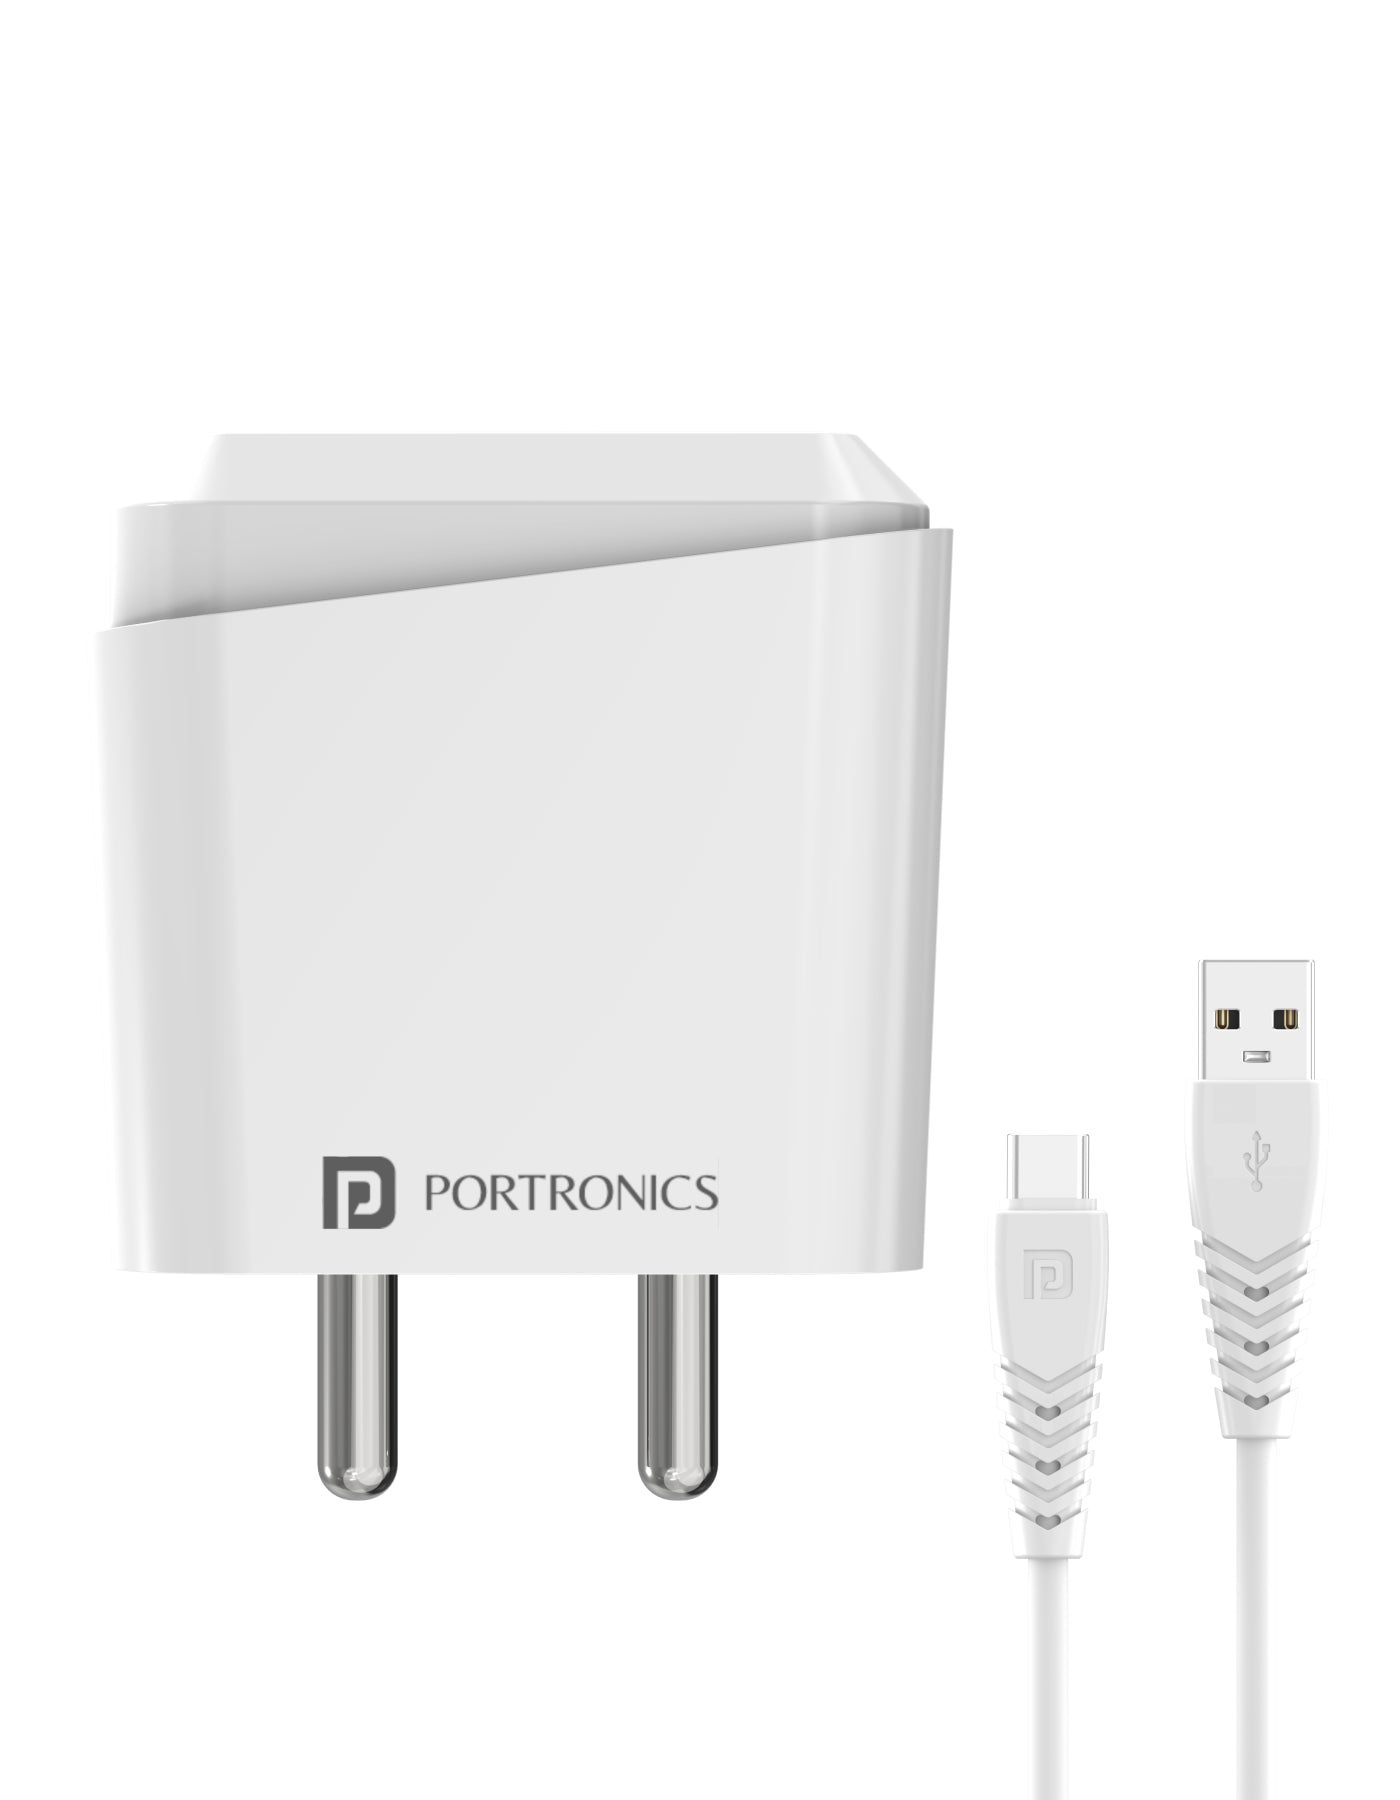 Portronics Adapto 40 M fast charger adapter for iOS and Android and 18W mobile charger 